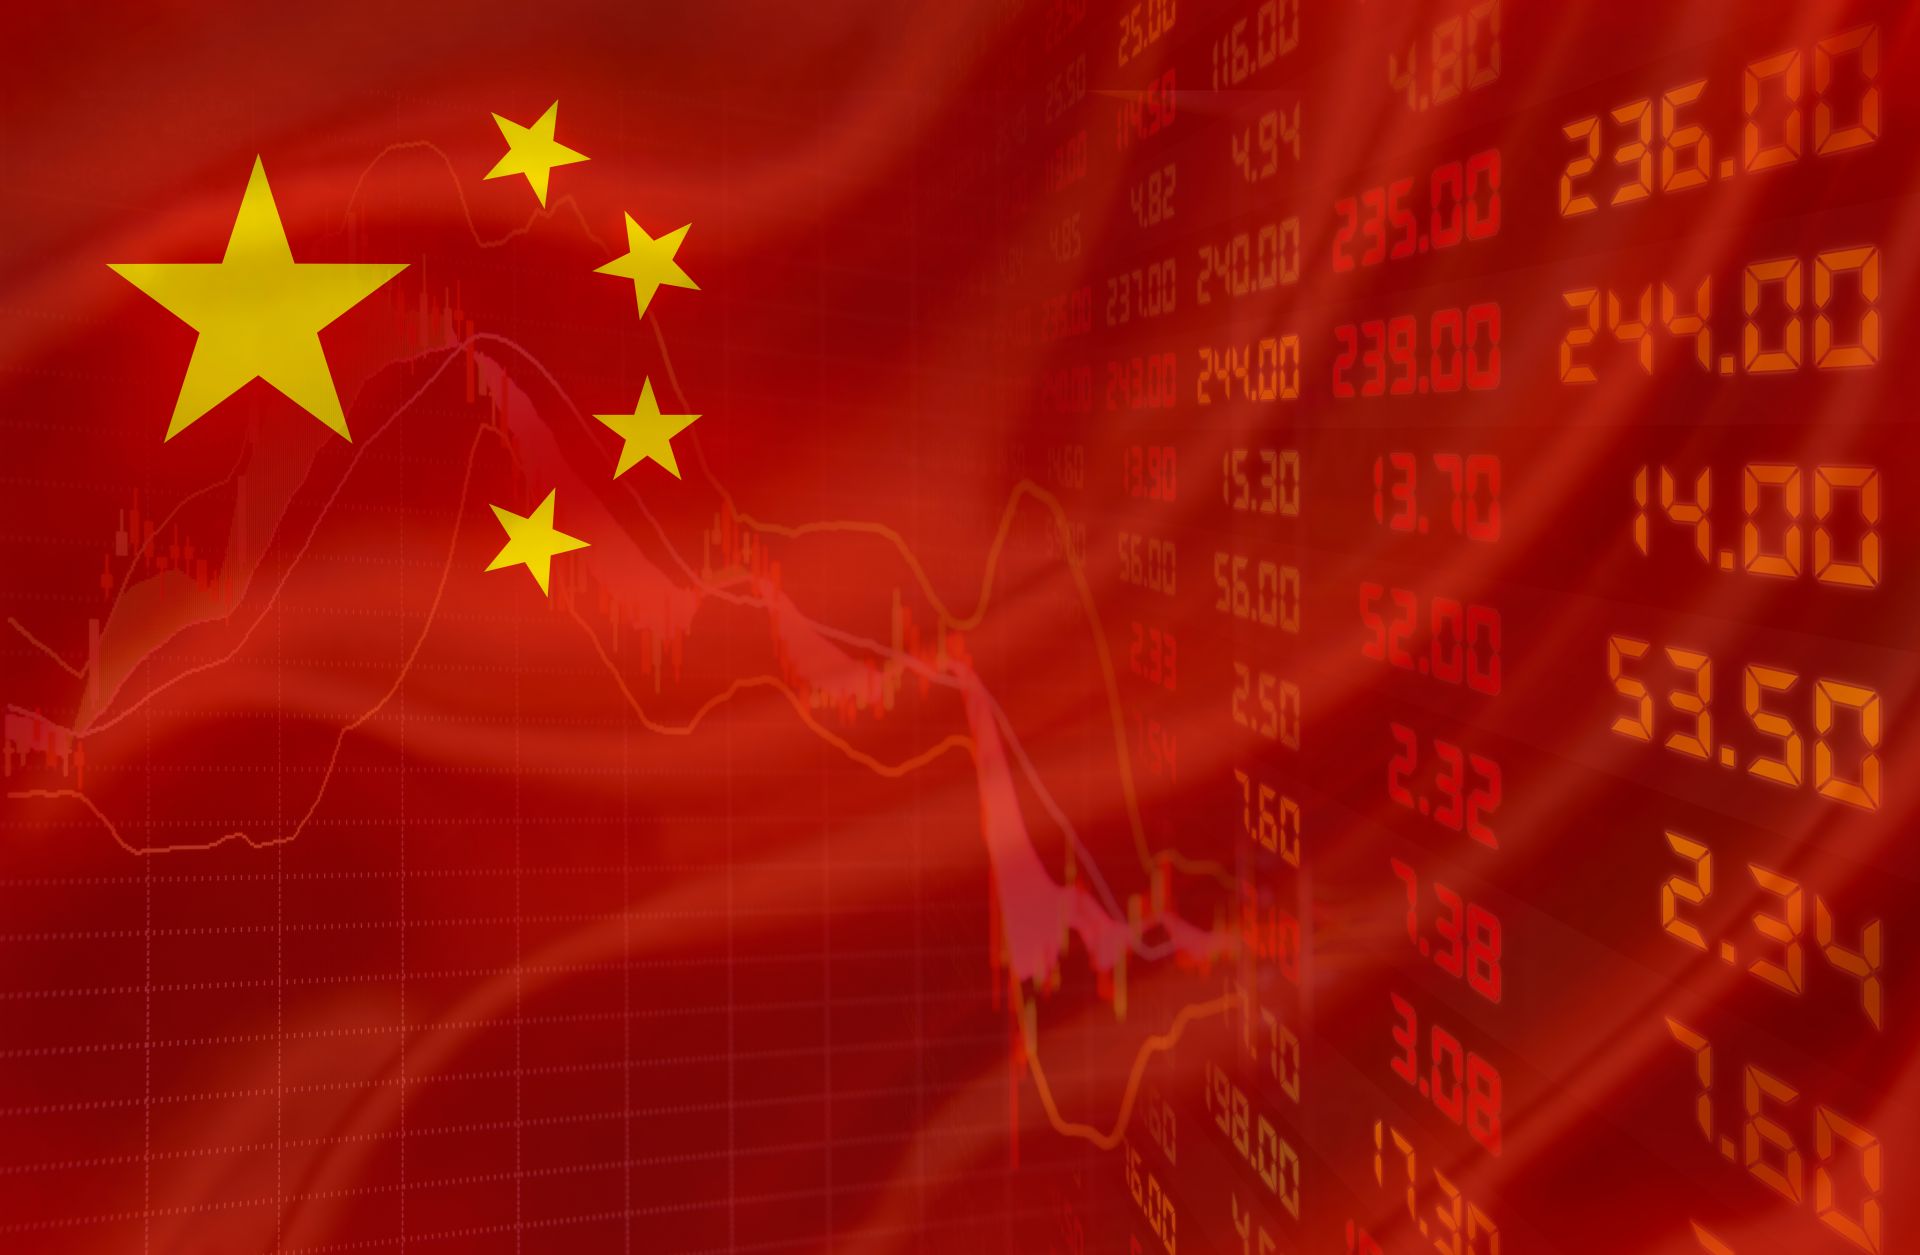 An illustration shows the Chinese flag overlaying stock prices.